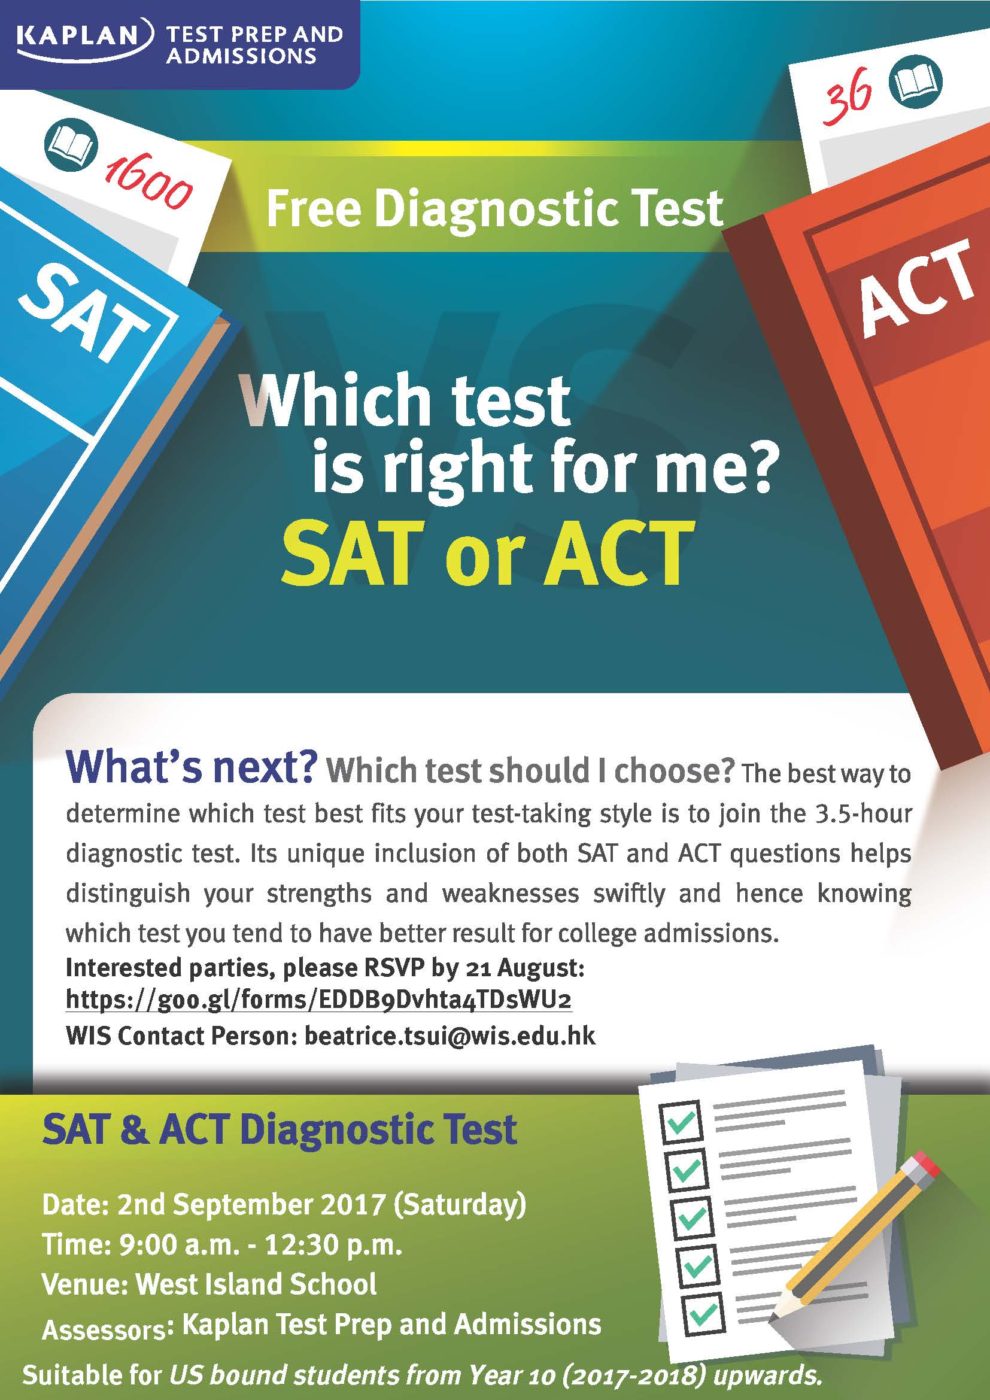 west-island-school-esf-free-act-vs-sat-diagnostic-test-at-west-island